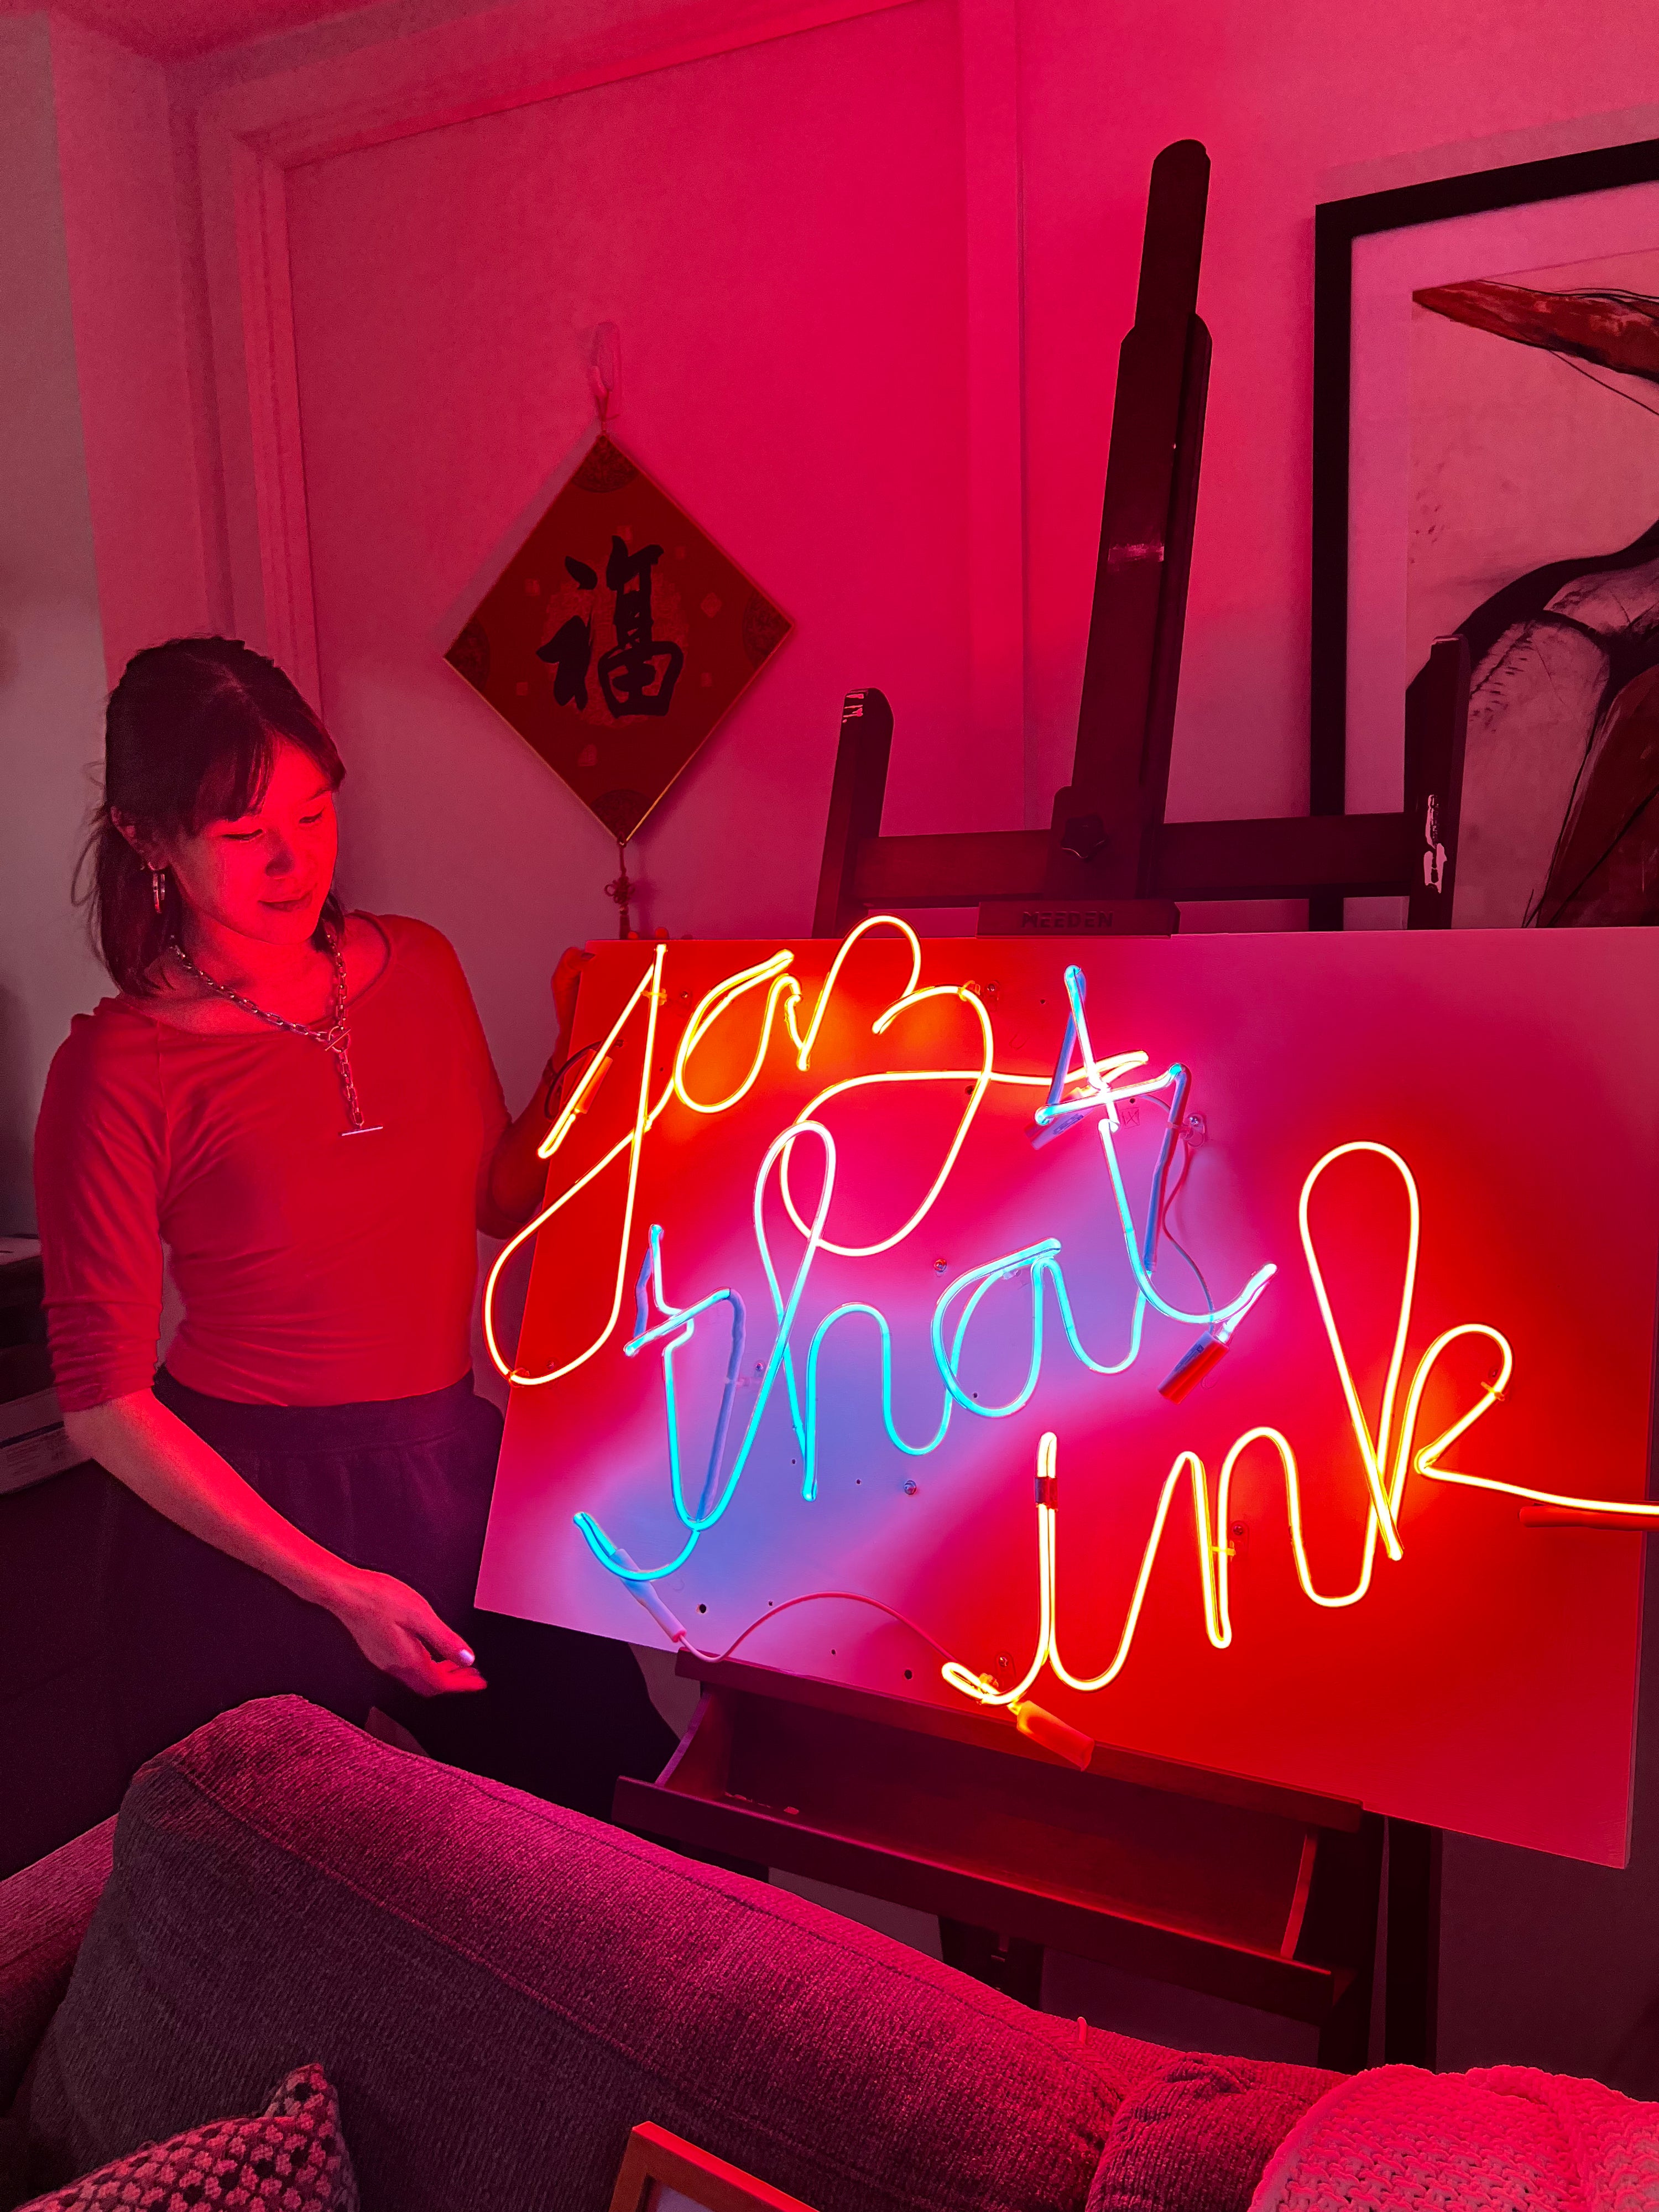 Bonnie standing in front of her lit neon sign which reads "Jaz that ink"